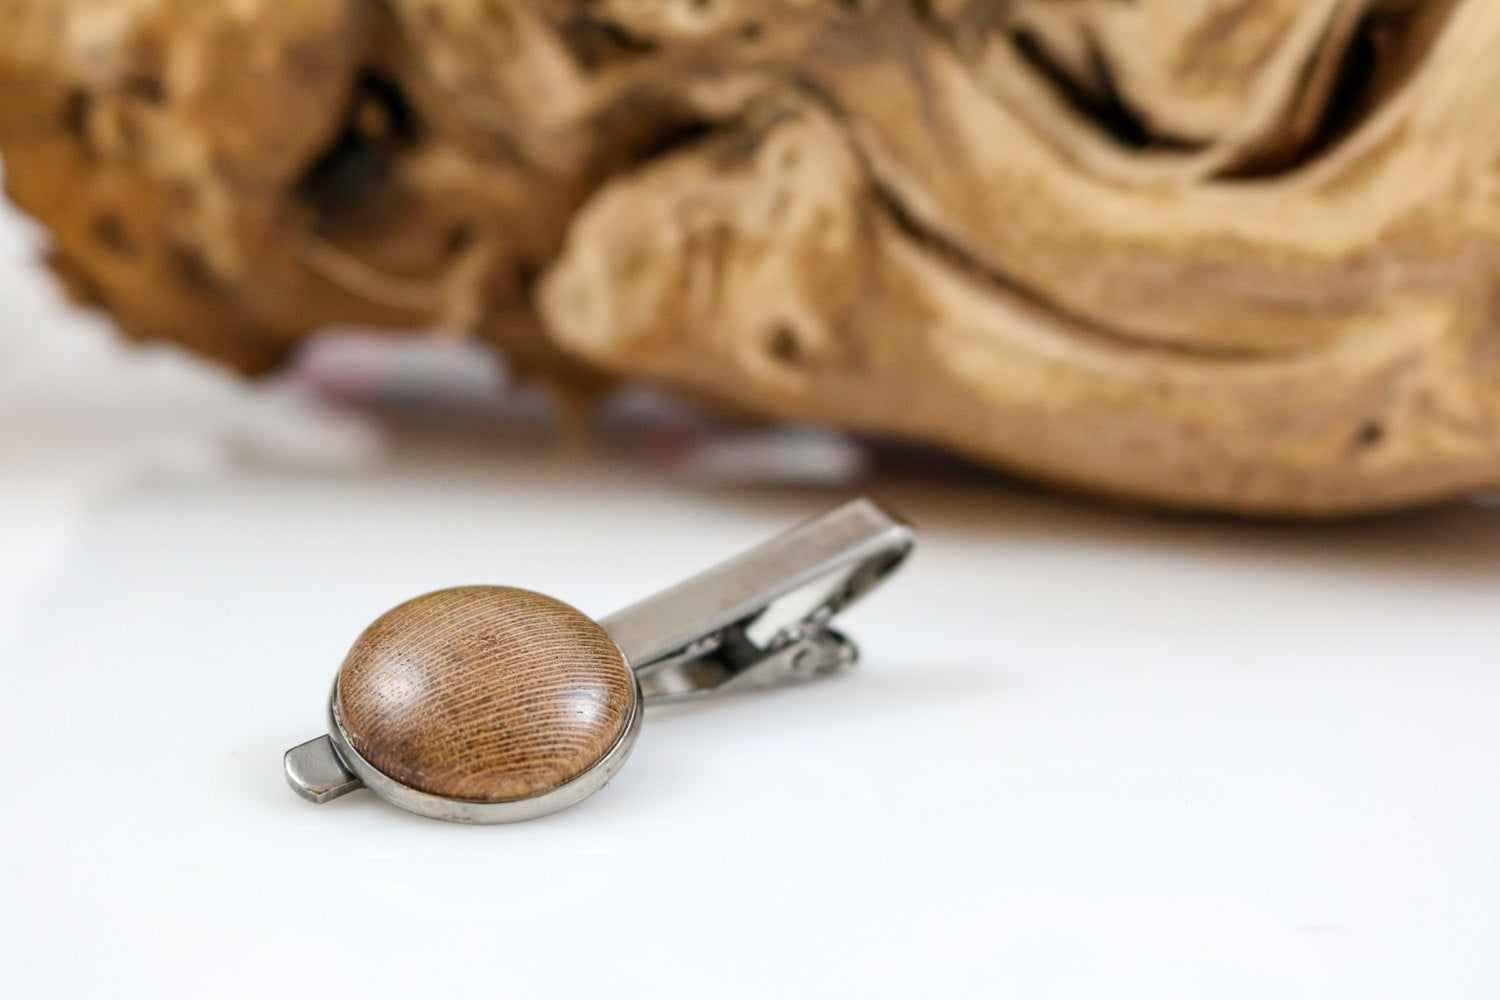 Old Vine Grapevine Tie Clip - Made from retired Napa grapevines!